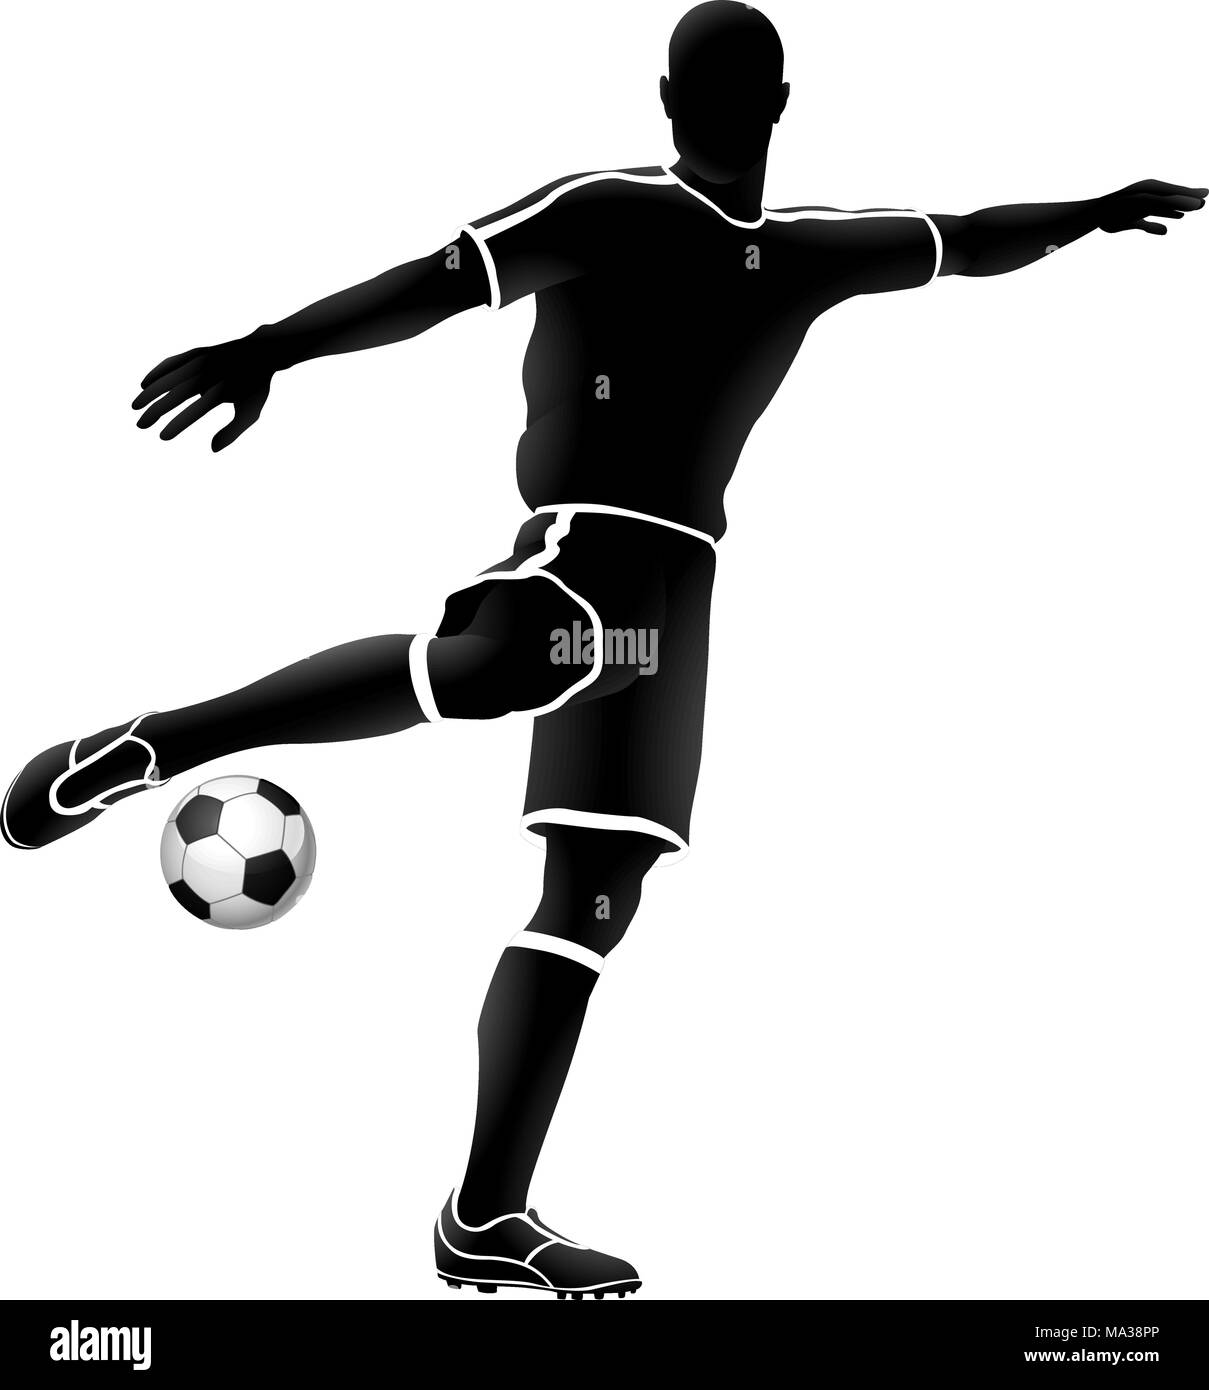 Soccer Football Player Sports Silhouette Stock Vector